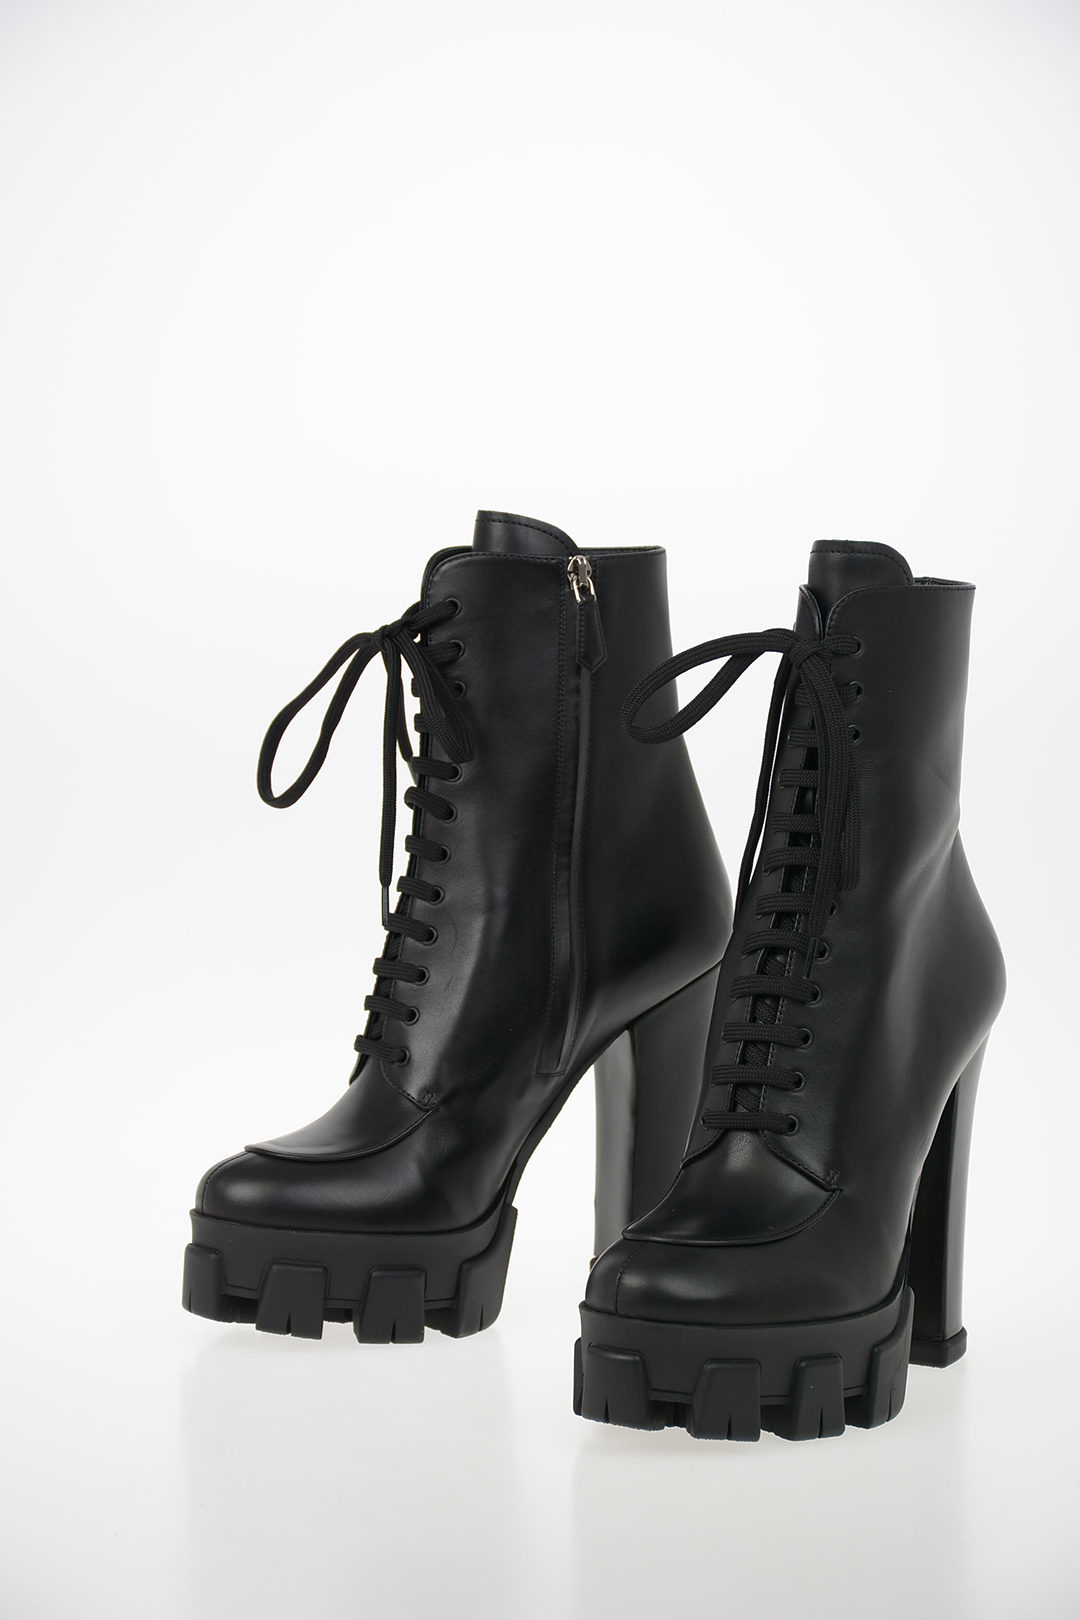 Prada Leather Track Combat Boots 14cm women - Glamood Outlet